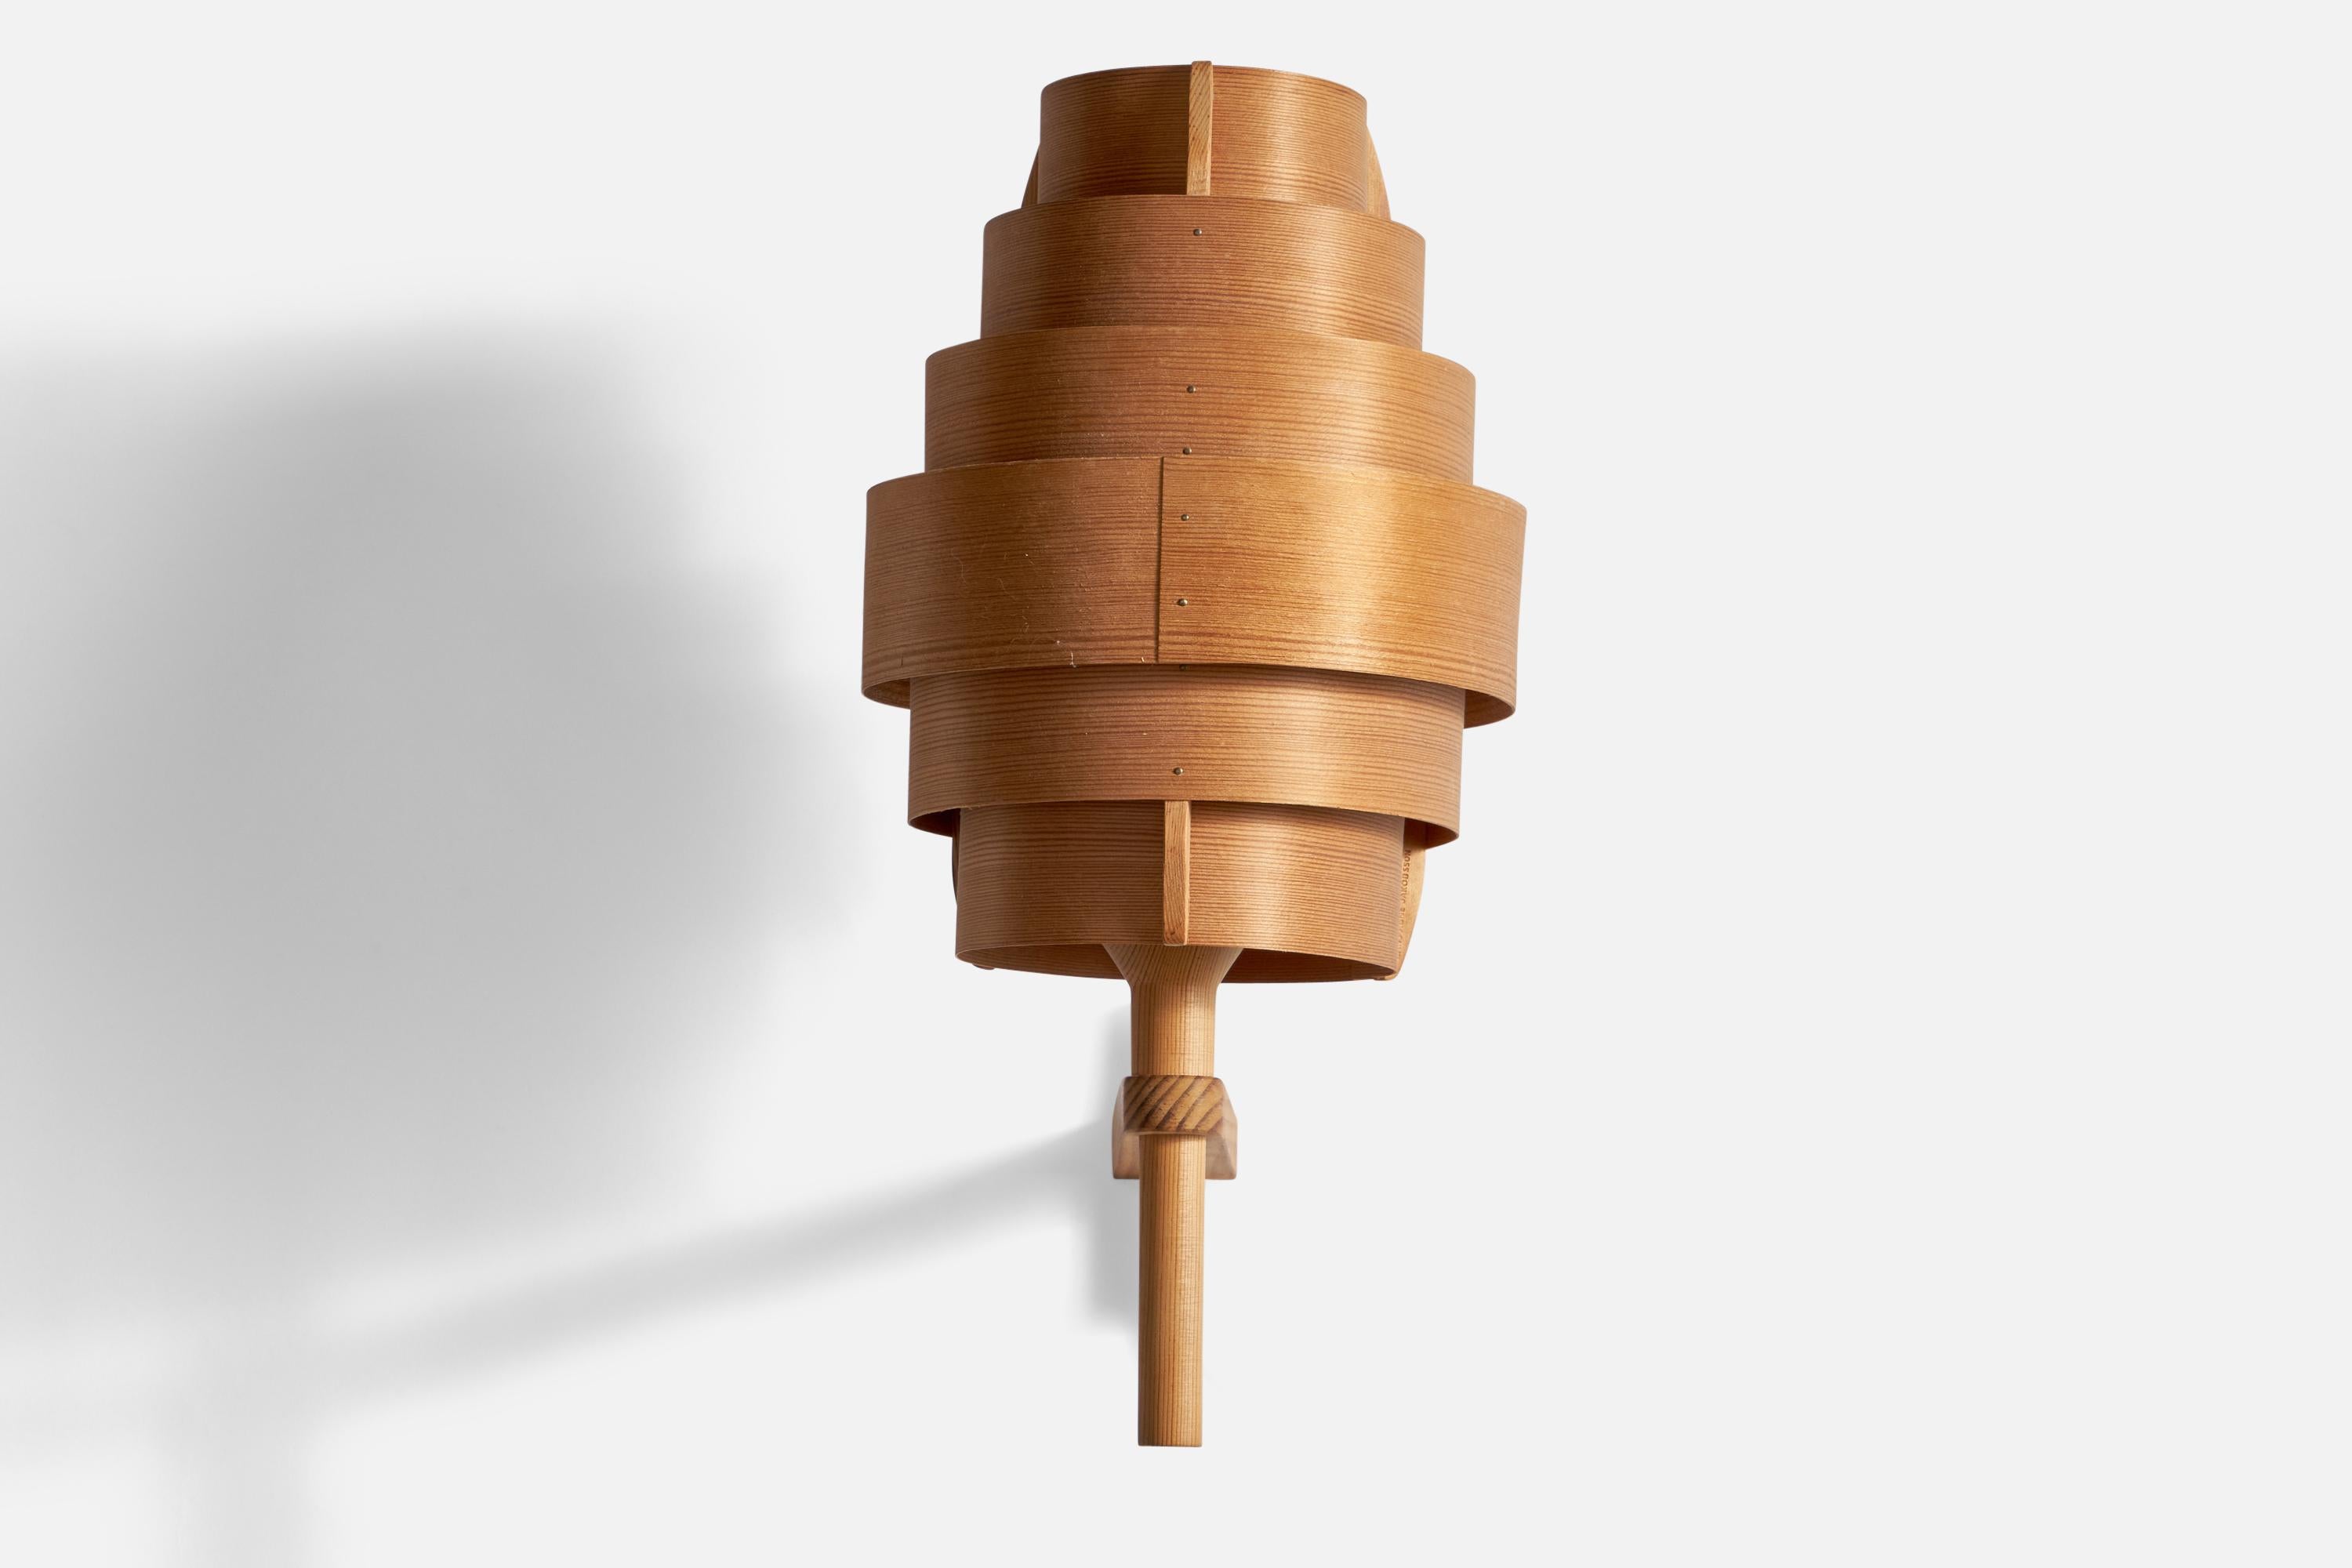 A pine and moulded pine veneer wall light designed and produced by Hans-Agne Jakobsson, Sweden, 1970s.

Overall Dimensions (inches): 15.8” H x 7.5” W x 11.75” D
Back Plate Dimensions (inches): 4” H x 1.65” W x 0.9” D
Bulb Specifications: E-26